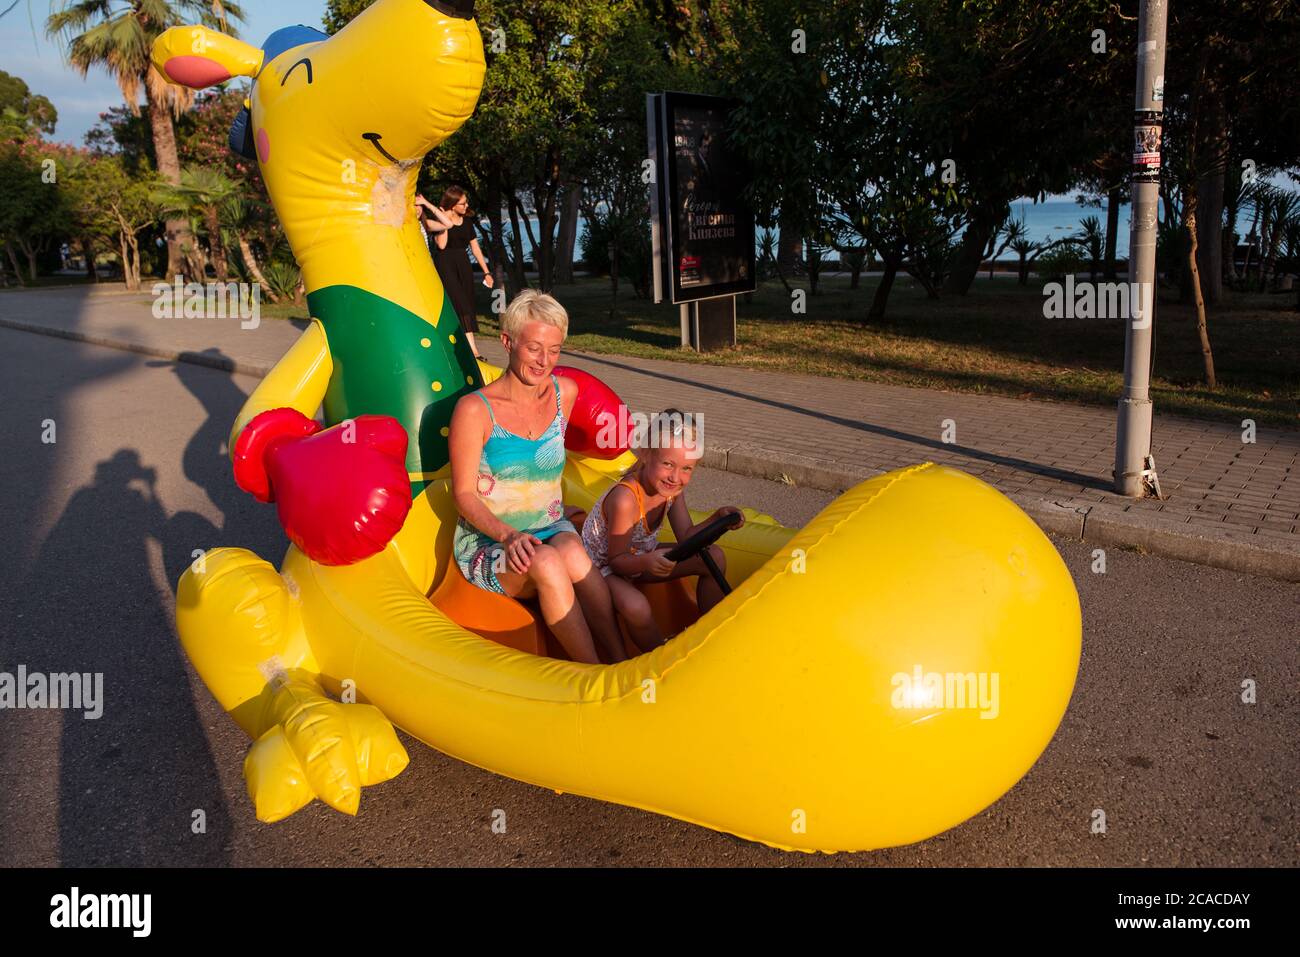 Sukhumi / Abkhazia - August 2, 2019: Russian mother and daughter tourists riding in toy vehicle simulating huge yellow plastic doll Stock Photo